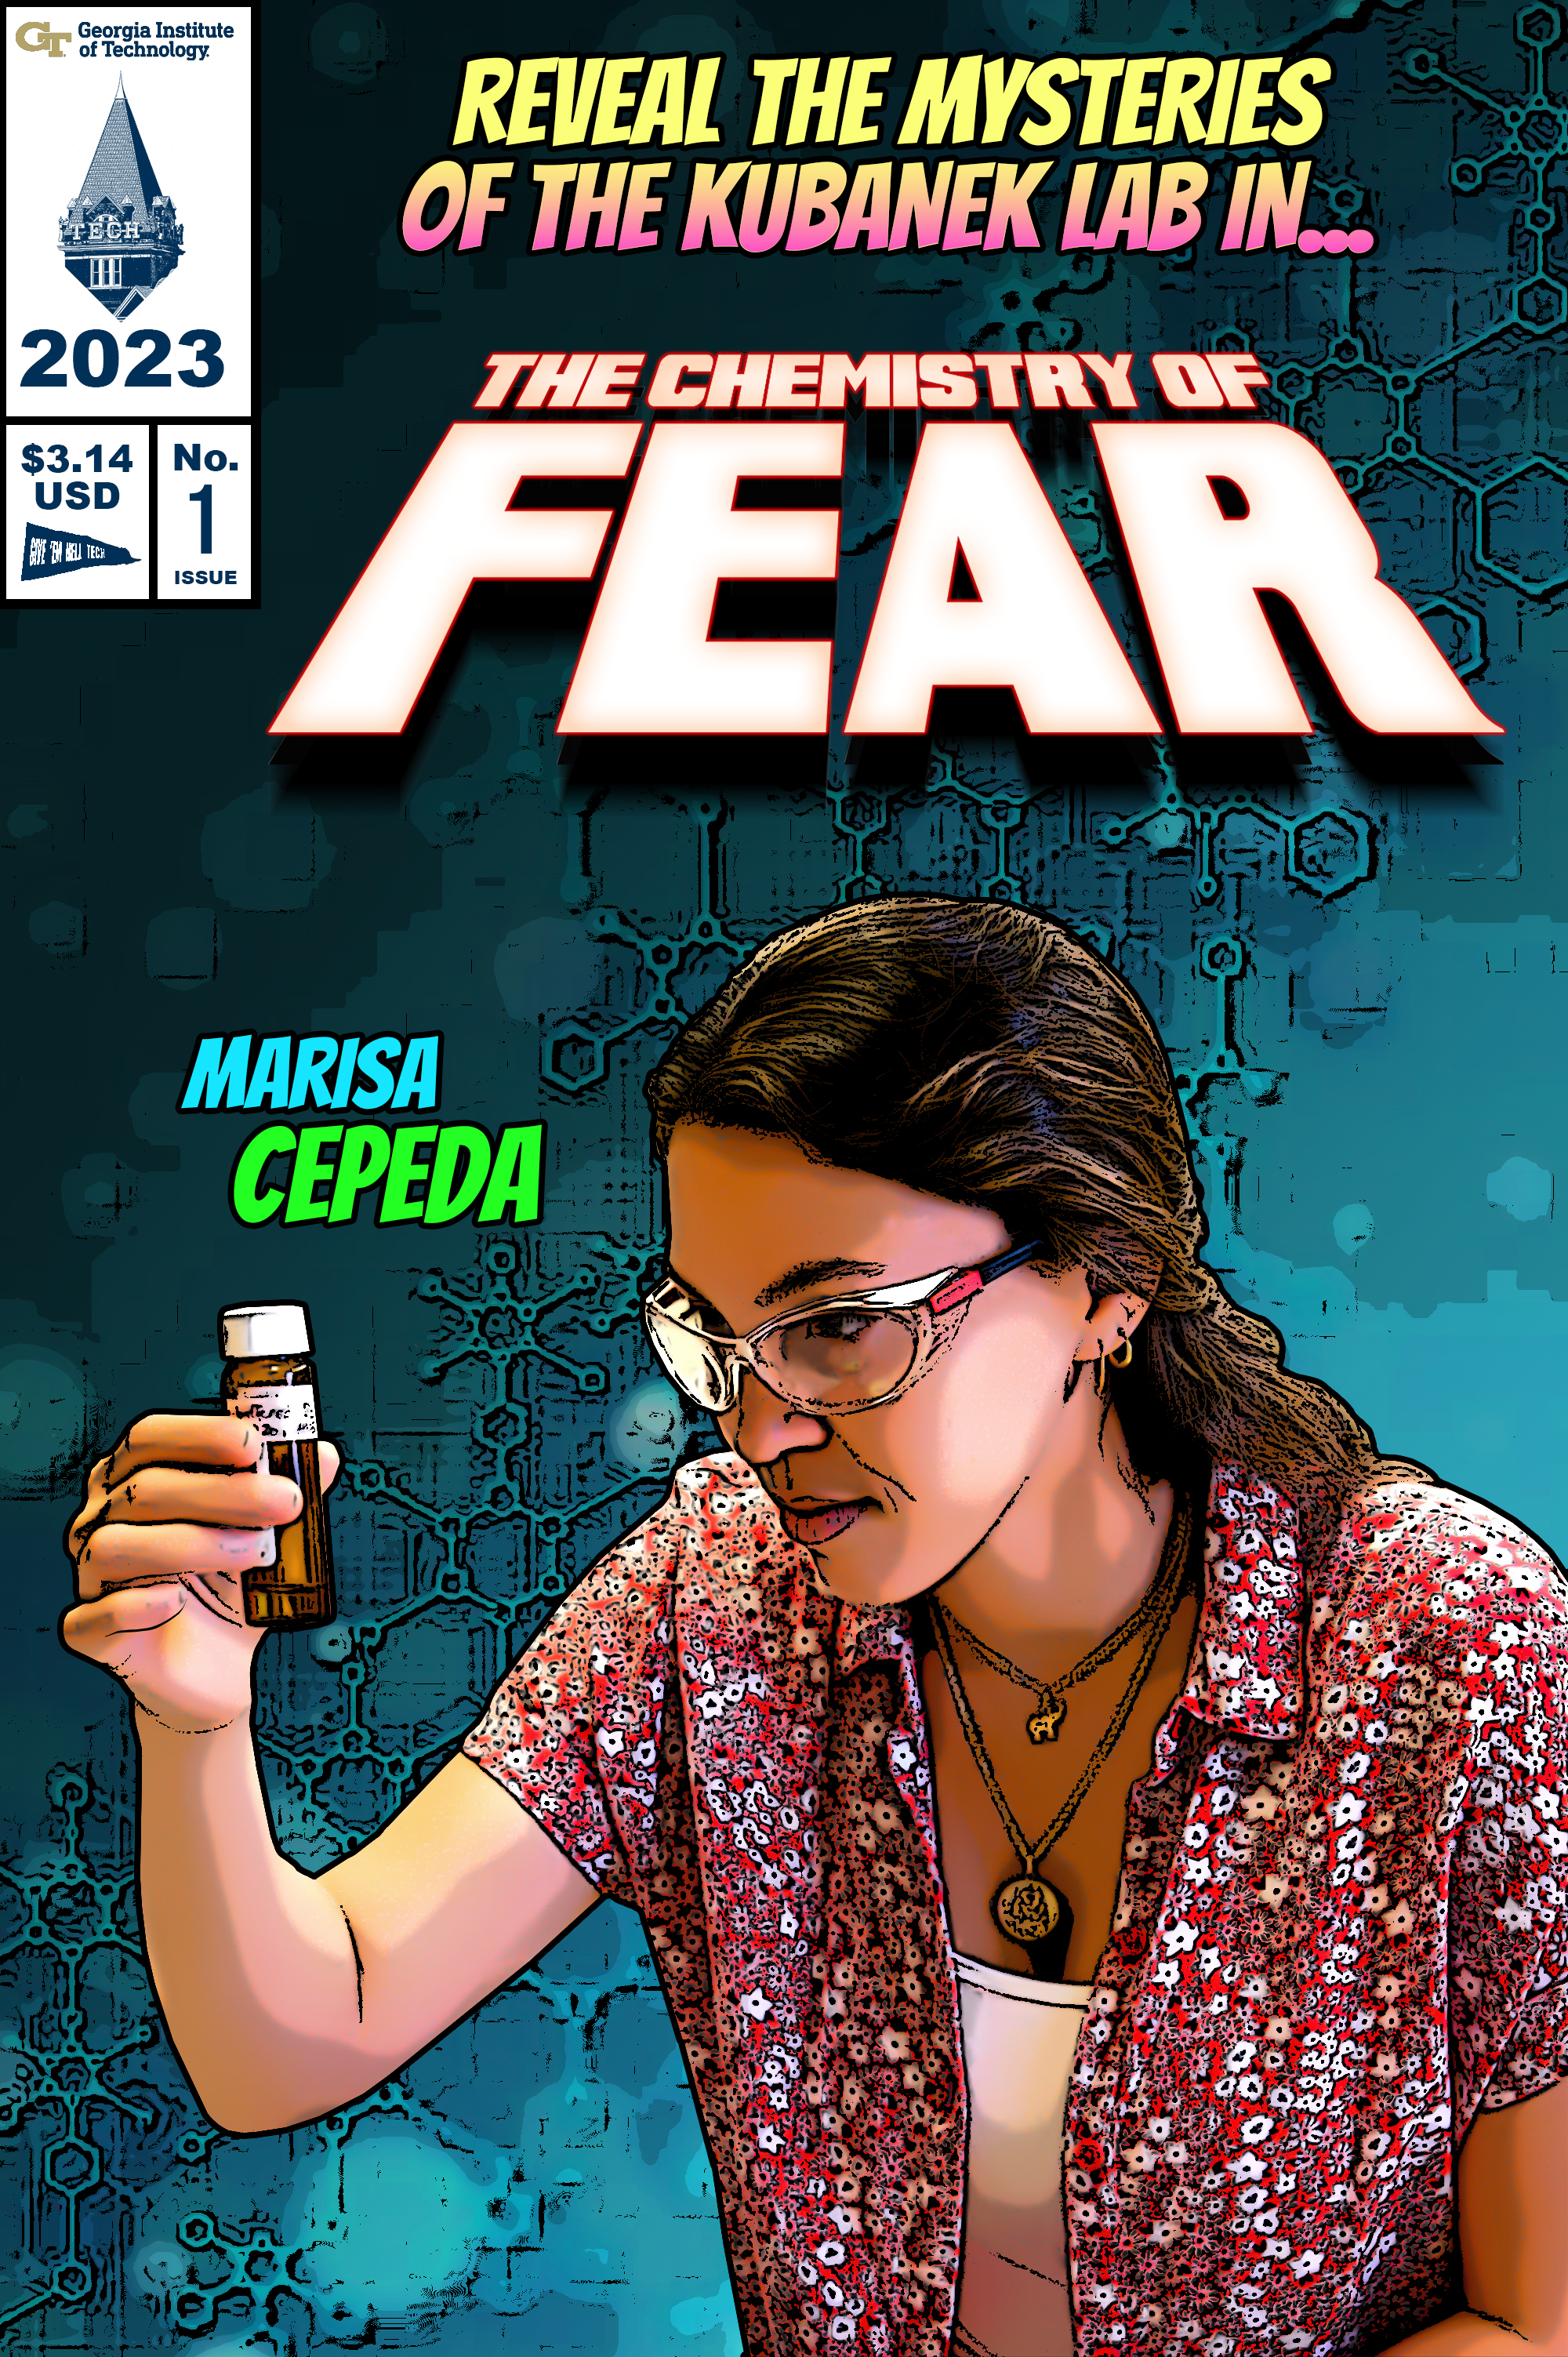 A comic book stylization of Marissa Cepeda titled, "The Chemistry of Fear"